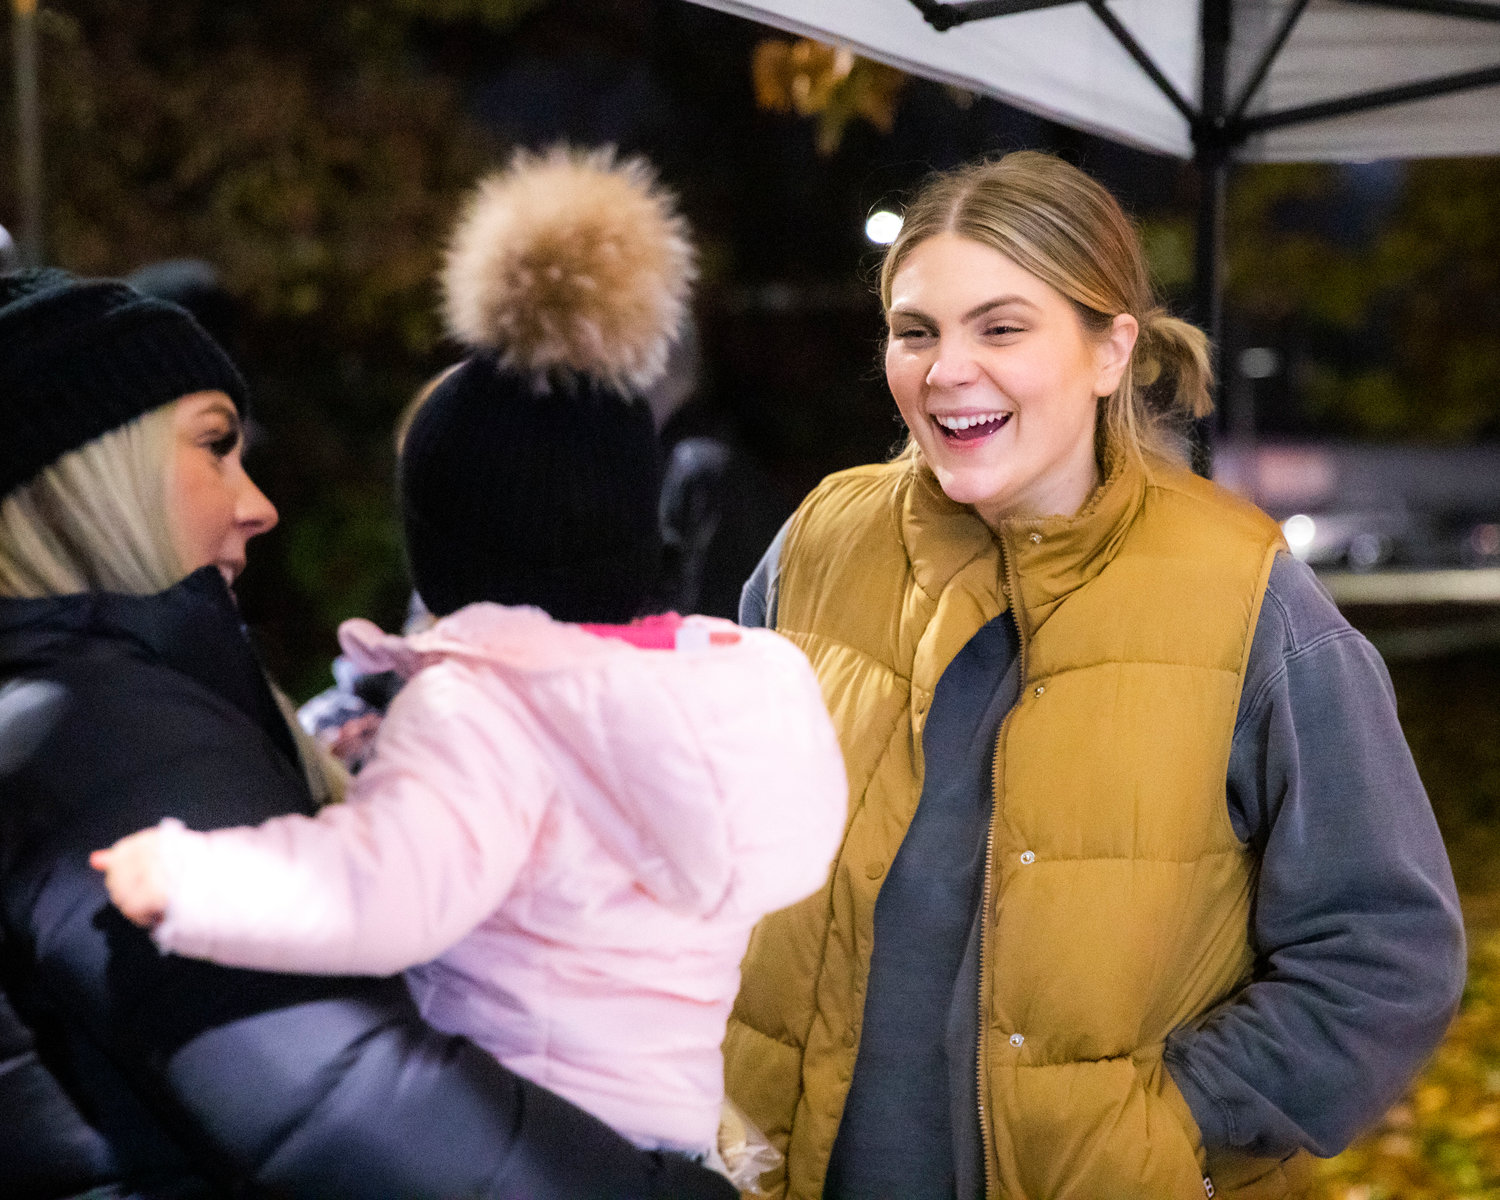 Ashlee Shirer, owner of Sweet Dough Cookie Co. smiles while greeting visitors at George Washington Park during a Christmas Tree Lighting celebration.